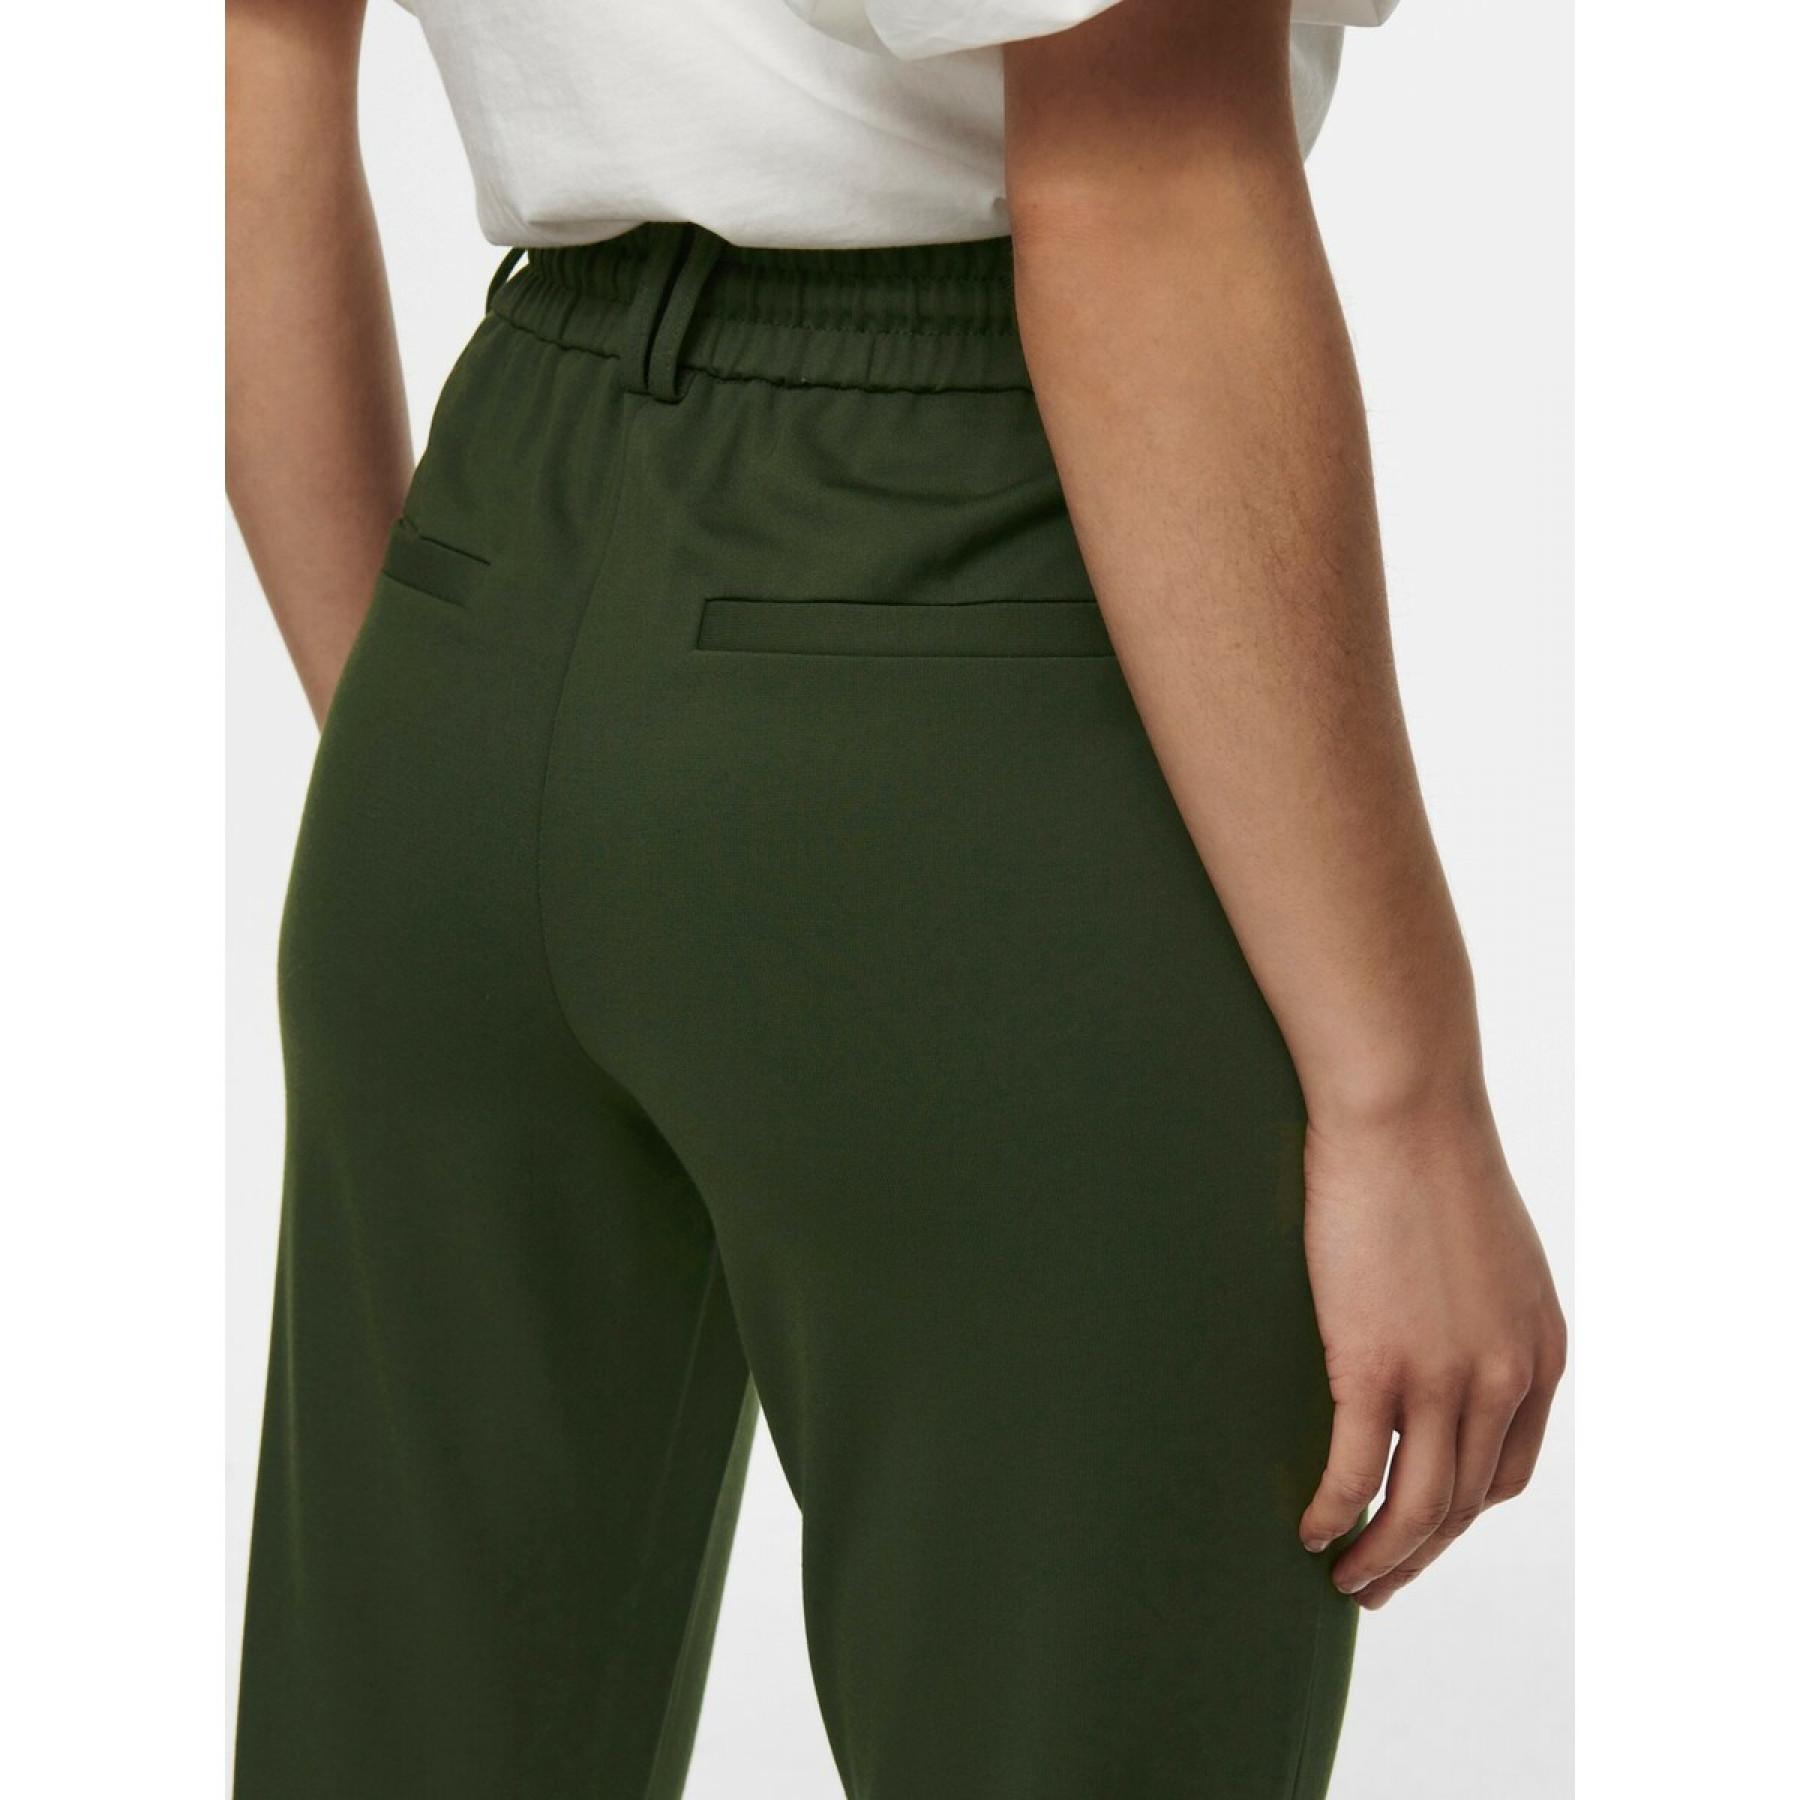 Women's trousers Only Poptrash life easy pant